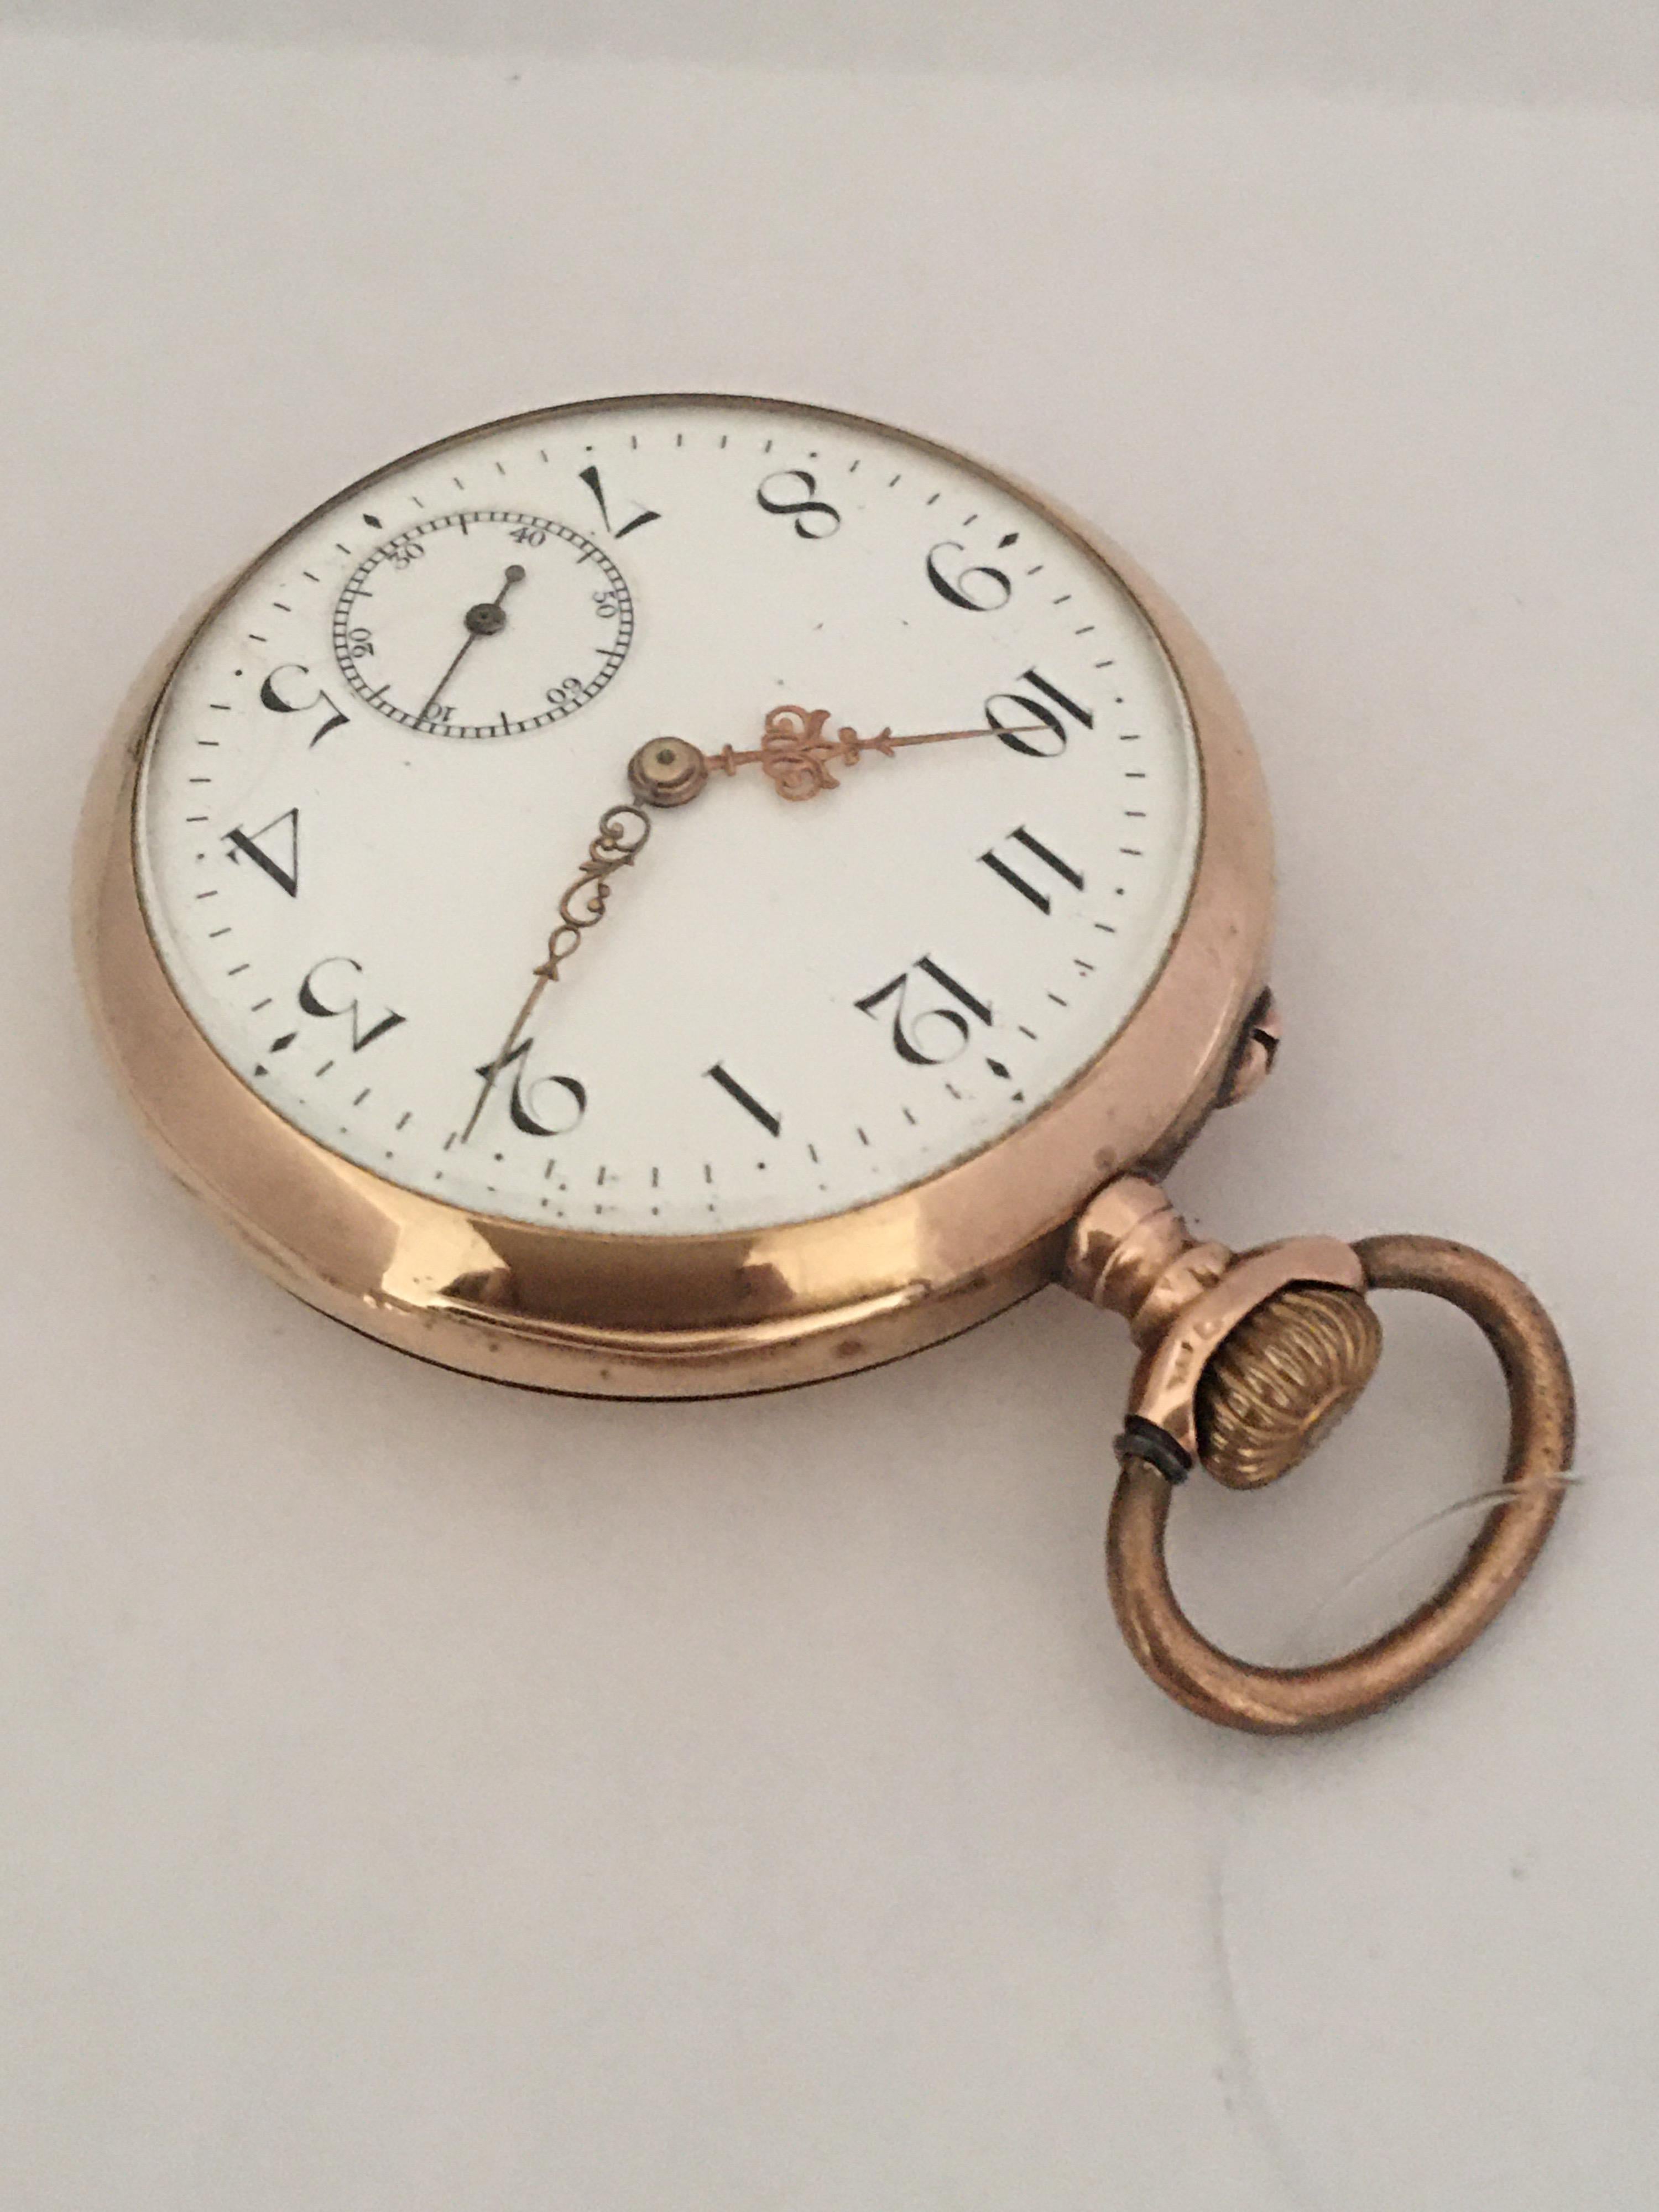 This watch is in good working condition and it is ticking well. Visible dents on the side and back cover of the watch case as shown. the watch size diameter is 49mm, and weighed 76.5 grams 

Please study the images carefully as form part of the